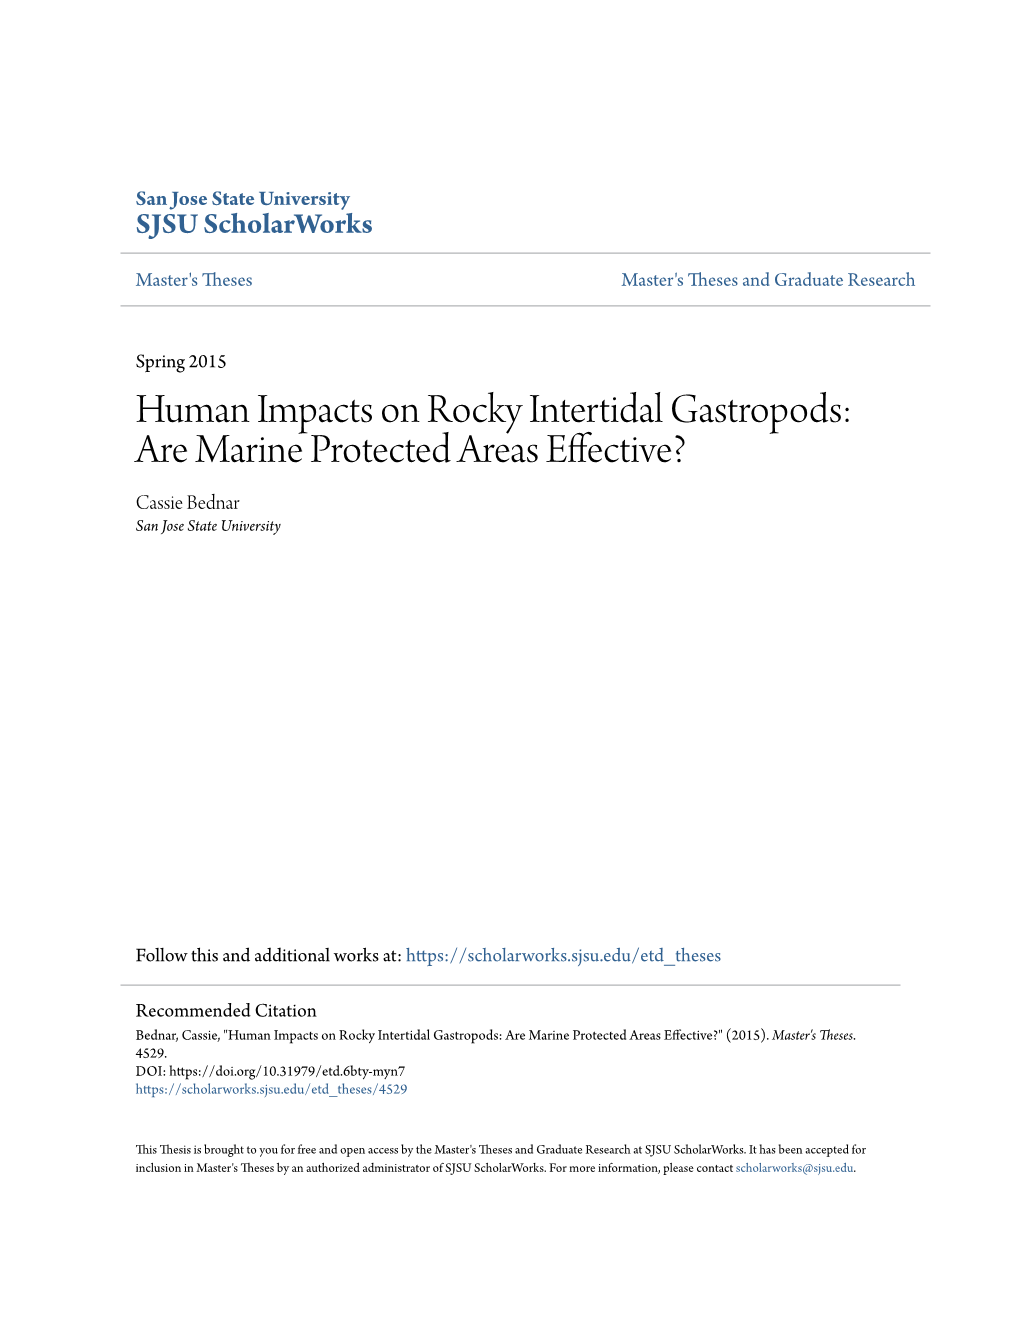 Human Impacts on Rocky Intertidal Gastropods: Are Marine Protected Areas Effective? Cassie Bednar San Jose State University